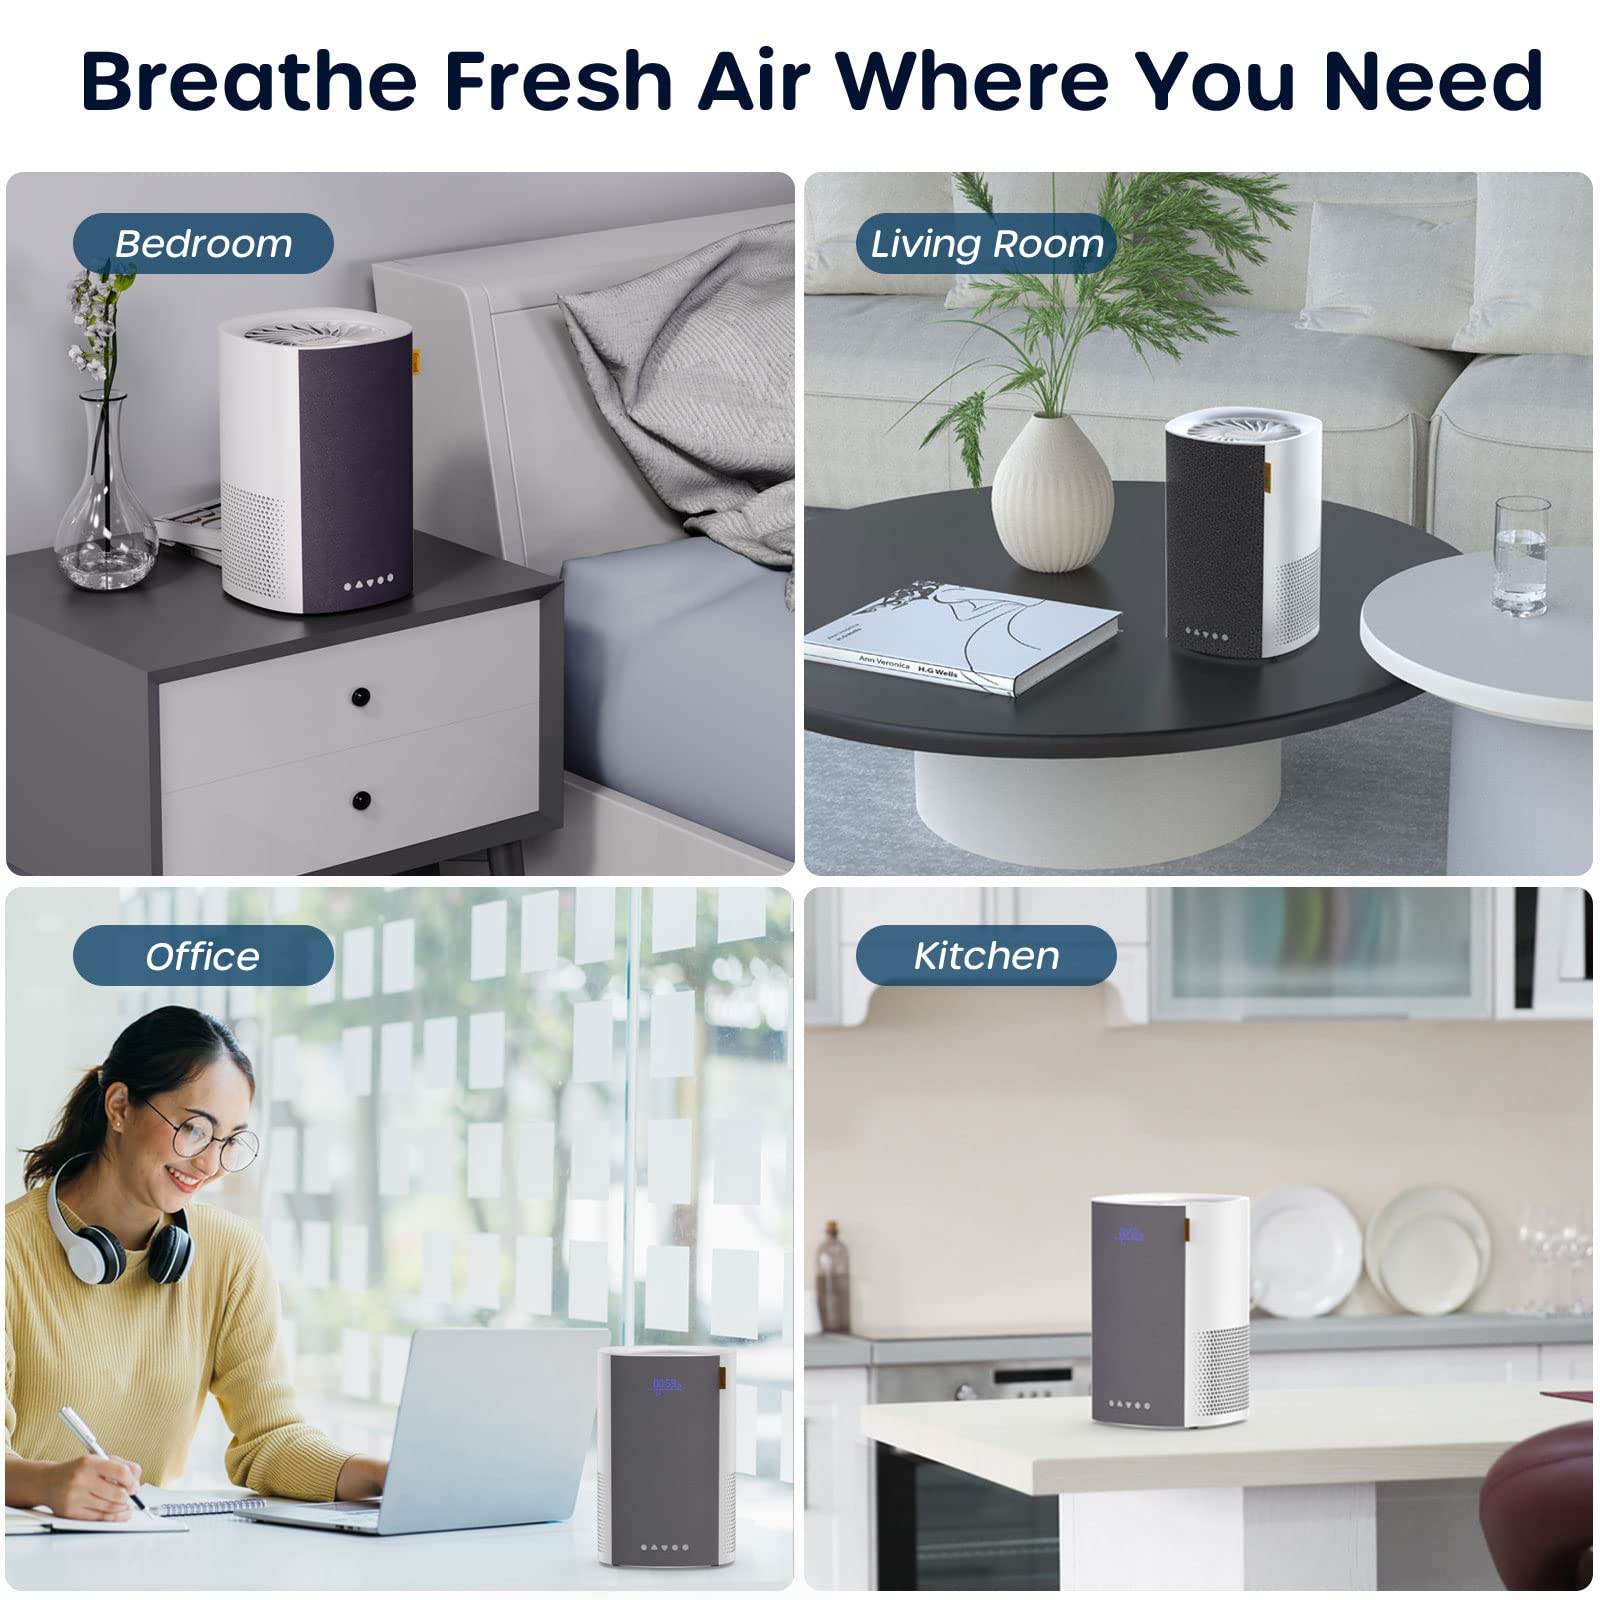 ECOWELL Air Purifiers for Bedroom, H13 HEPA Air Purifiers for Home Office Living Room, Air Filter Air Cleaner for Pet Dander Odors Smoke Pollen Dust, Small Air Purifier with 28dB Sleep Mode, EAP050